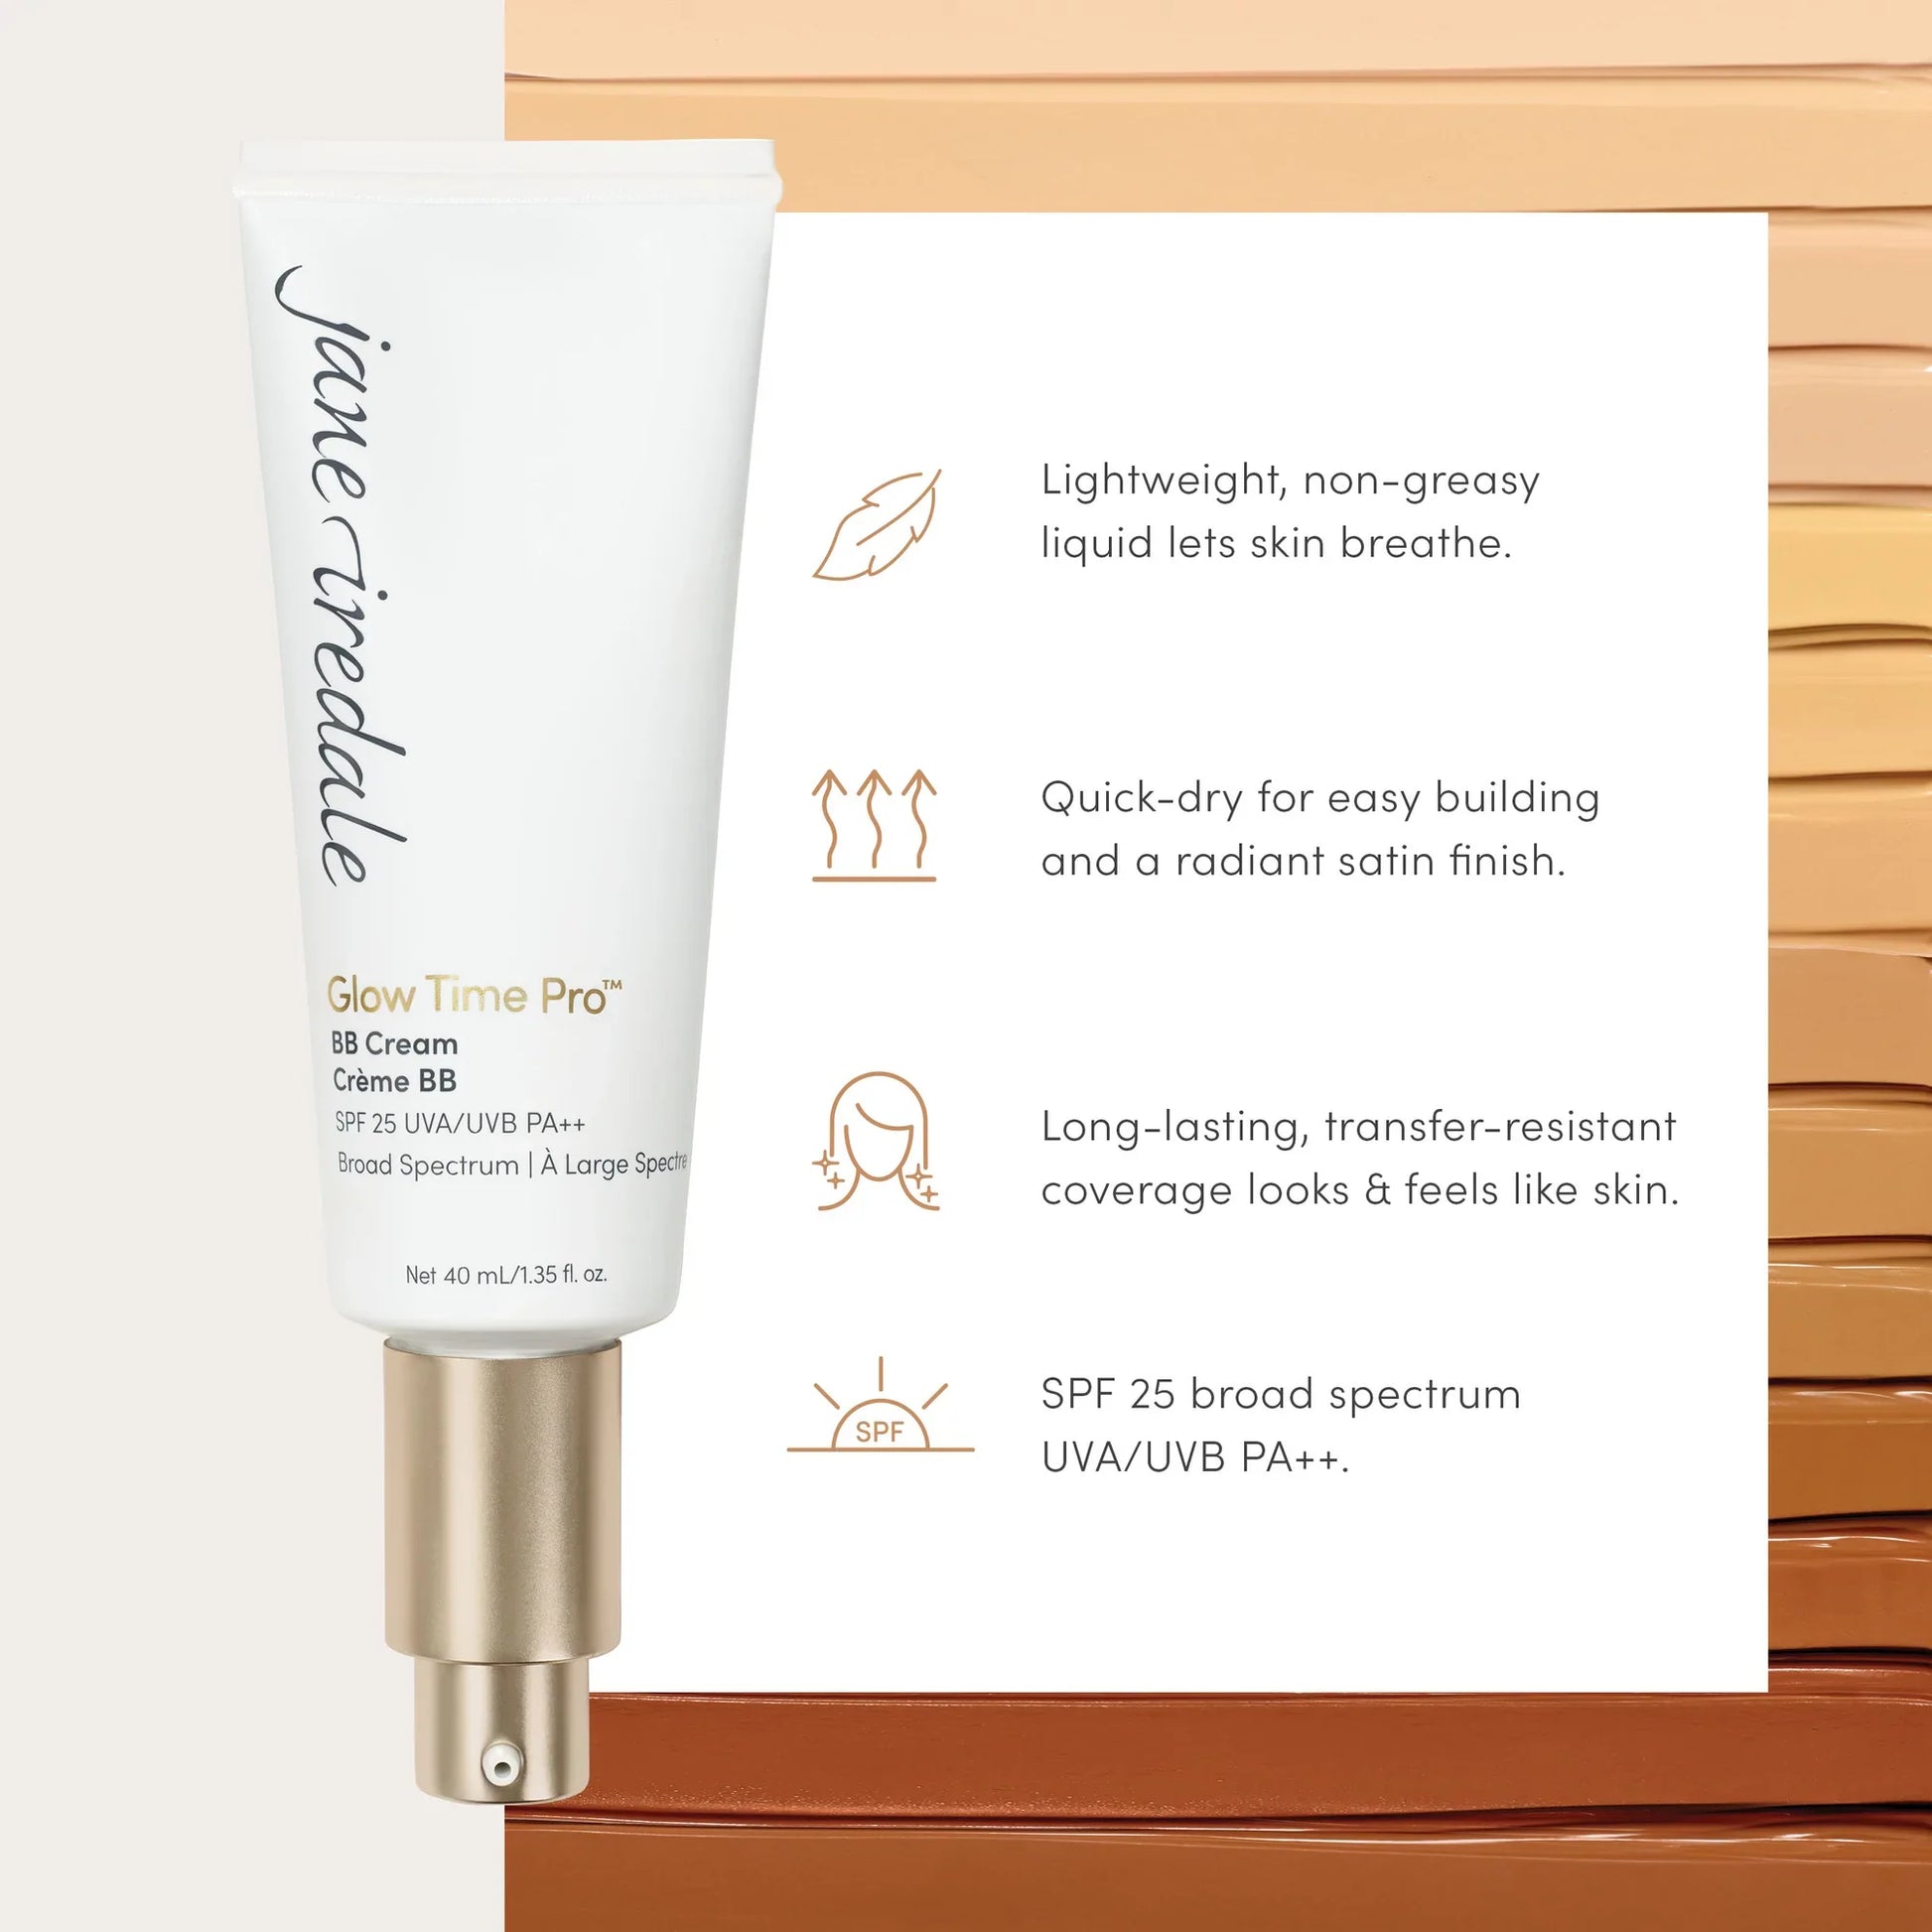 Jane Iredale Glow Time PRO BB Cream product benefit image